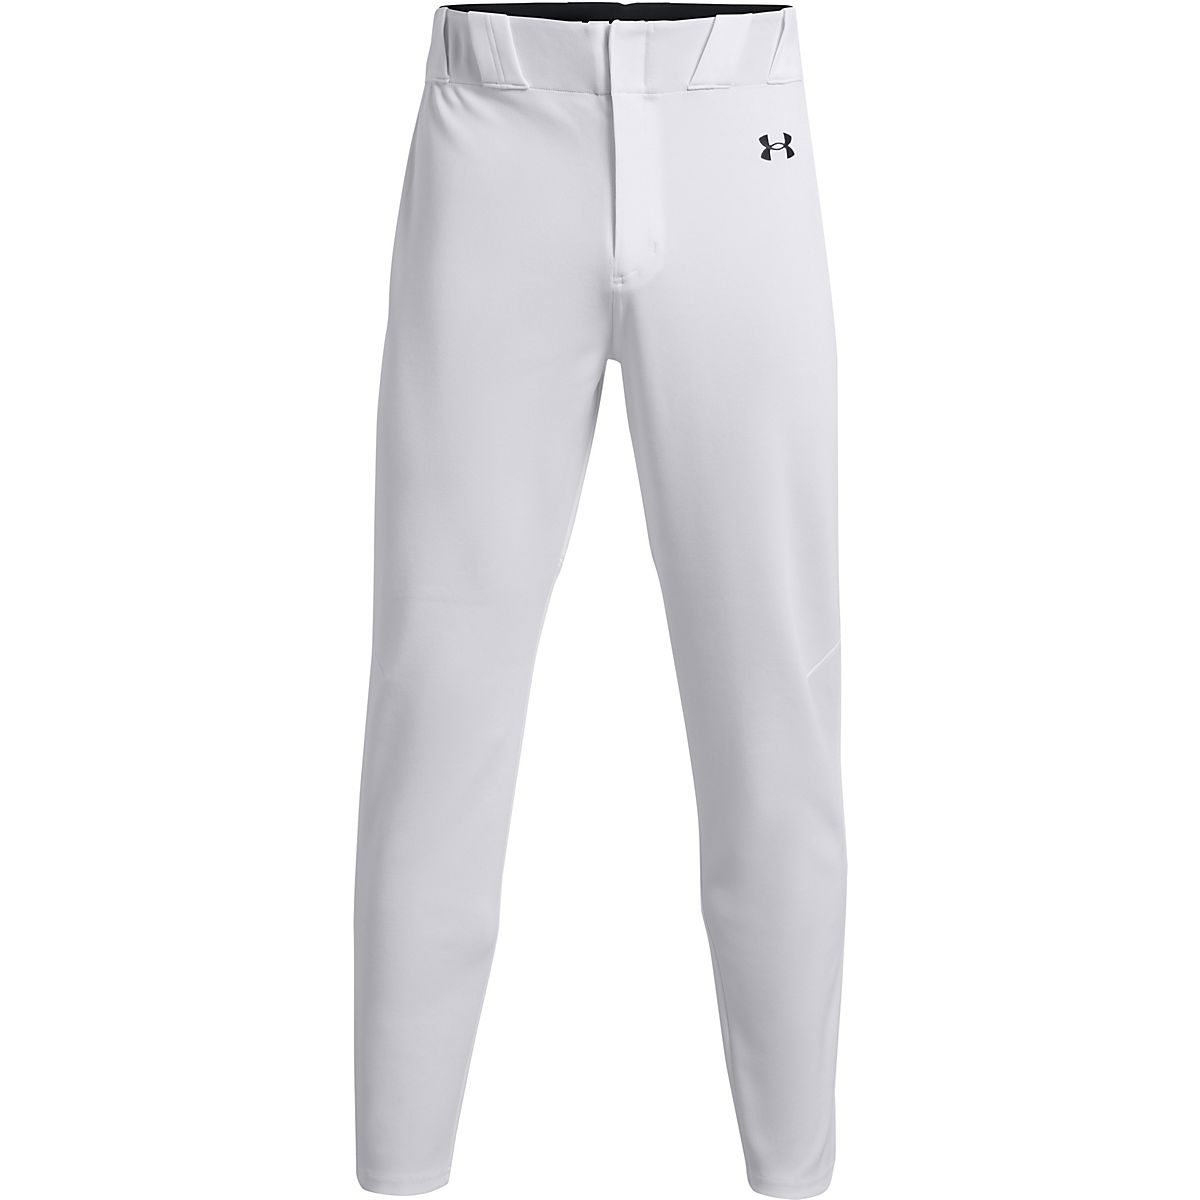 Under Armour Men's Gameday Vanish Pant | Free Shipping at Academy